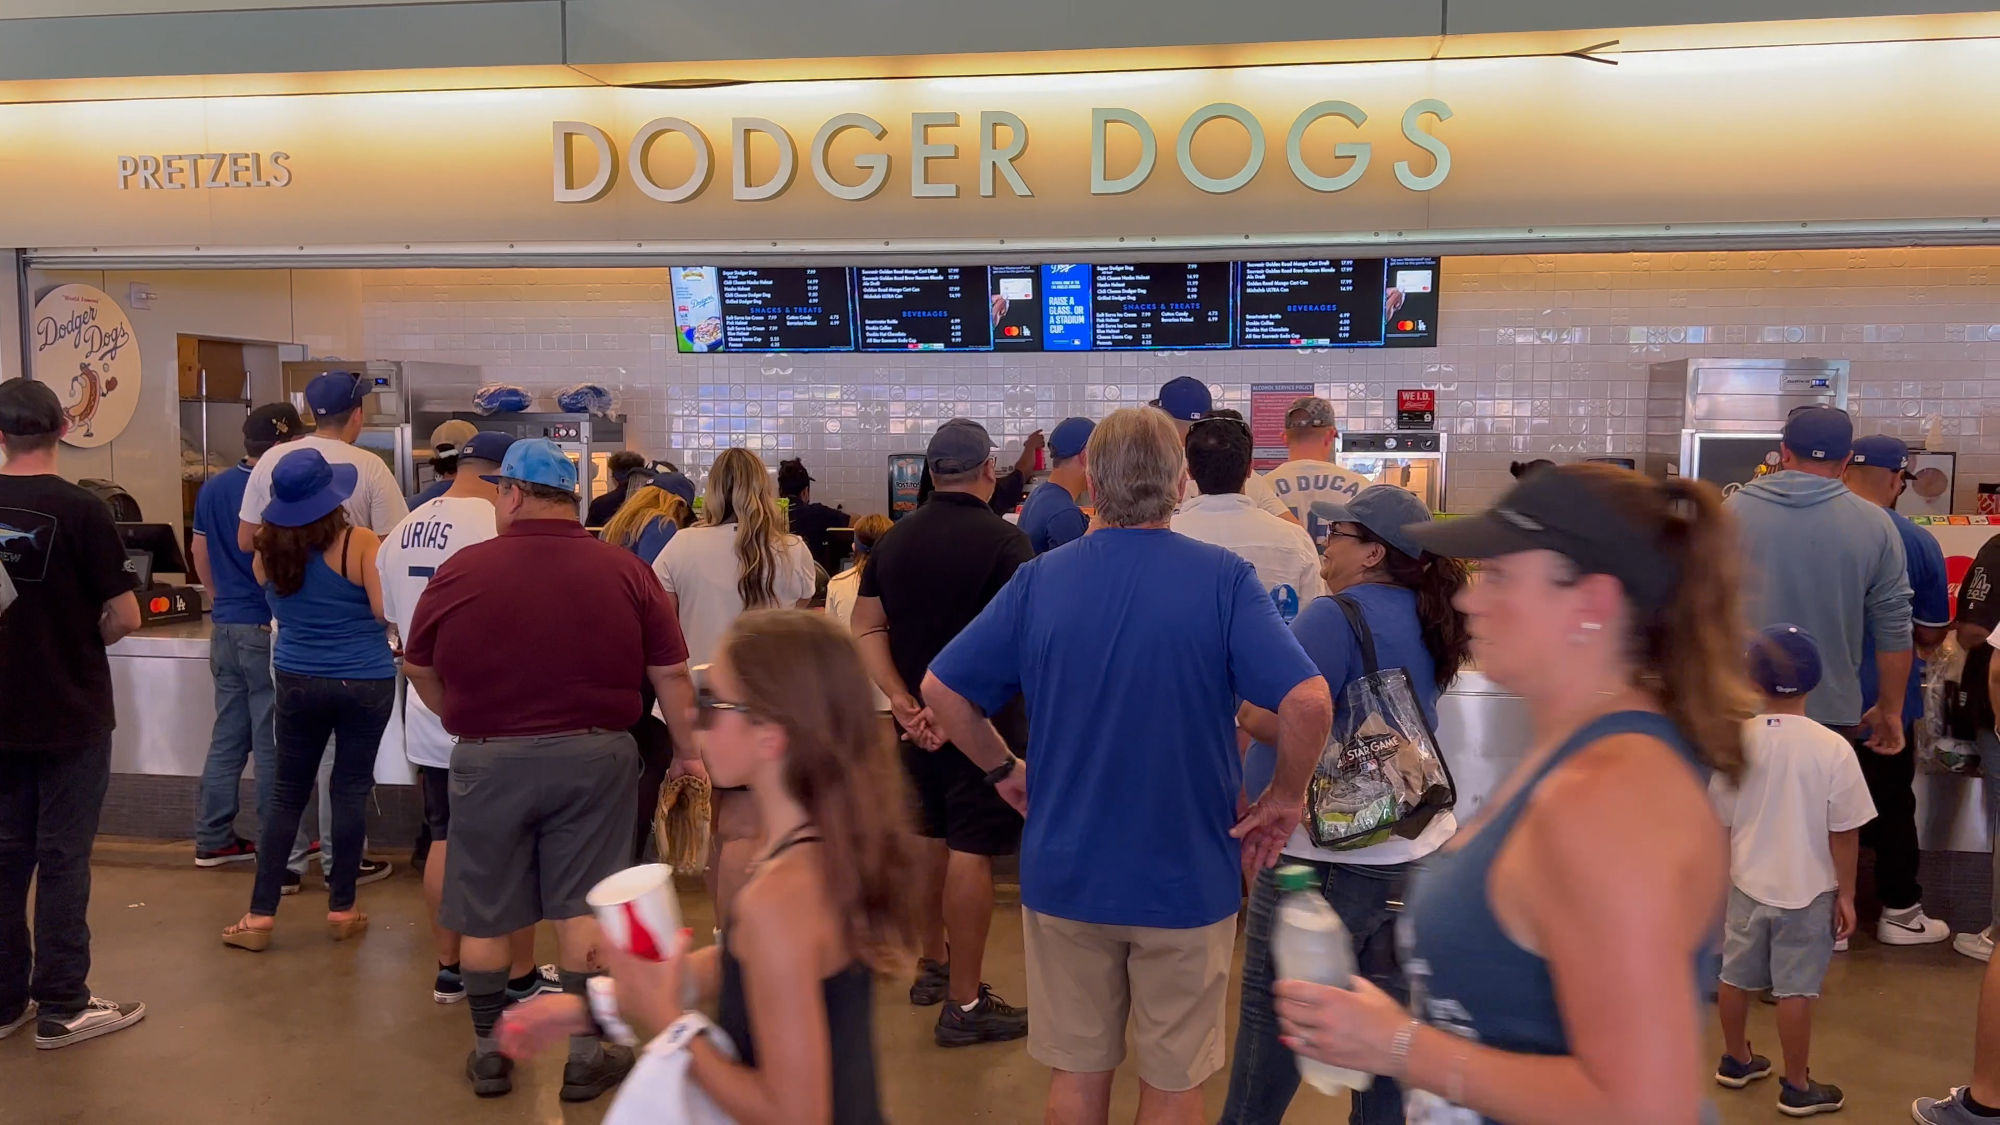 Traditional Dodger Dogs